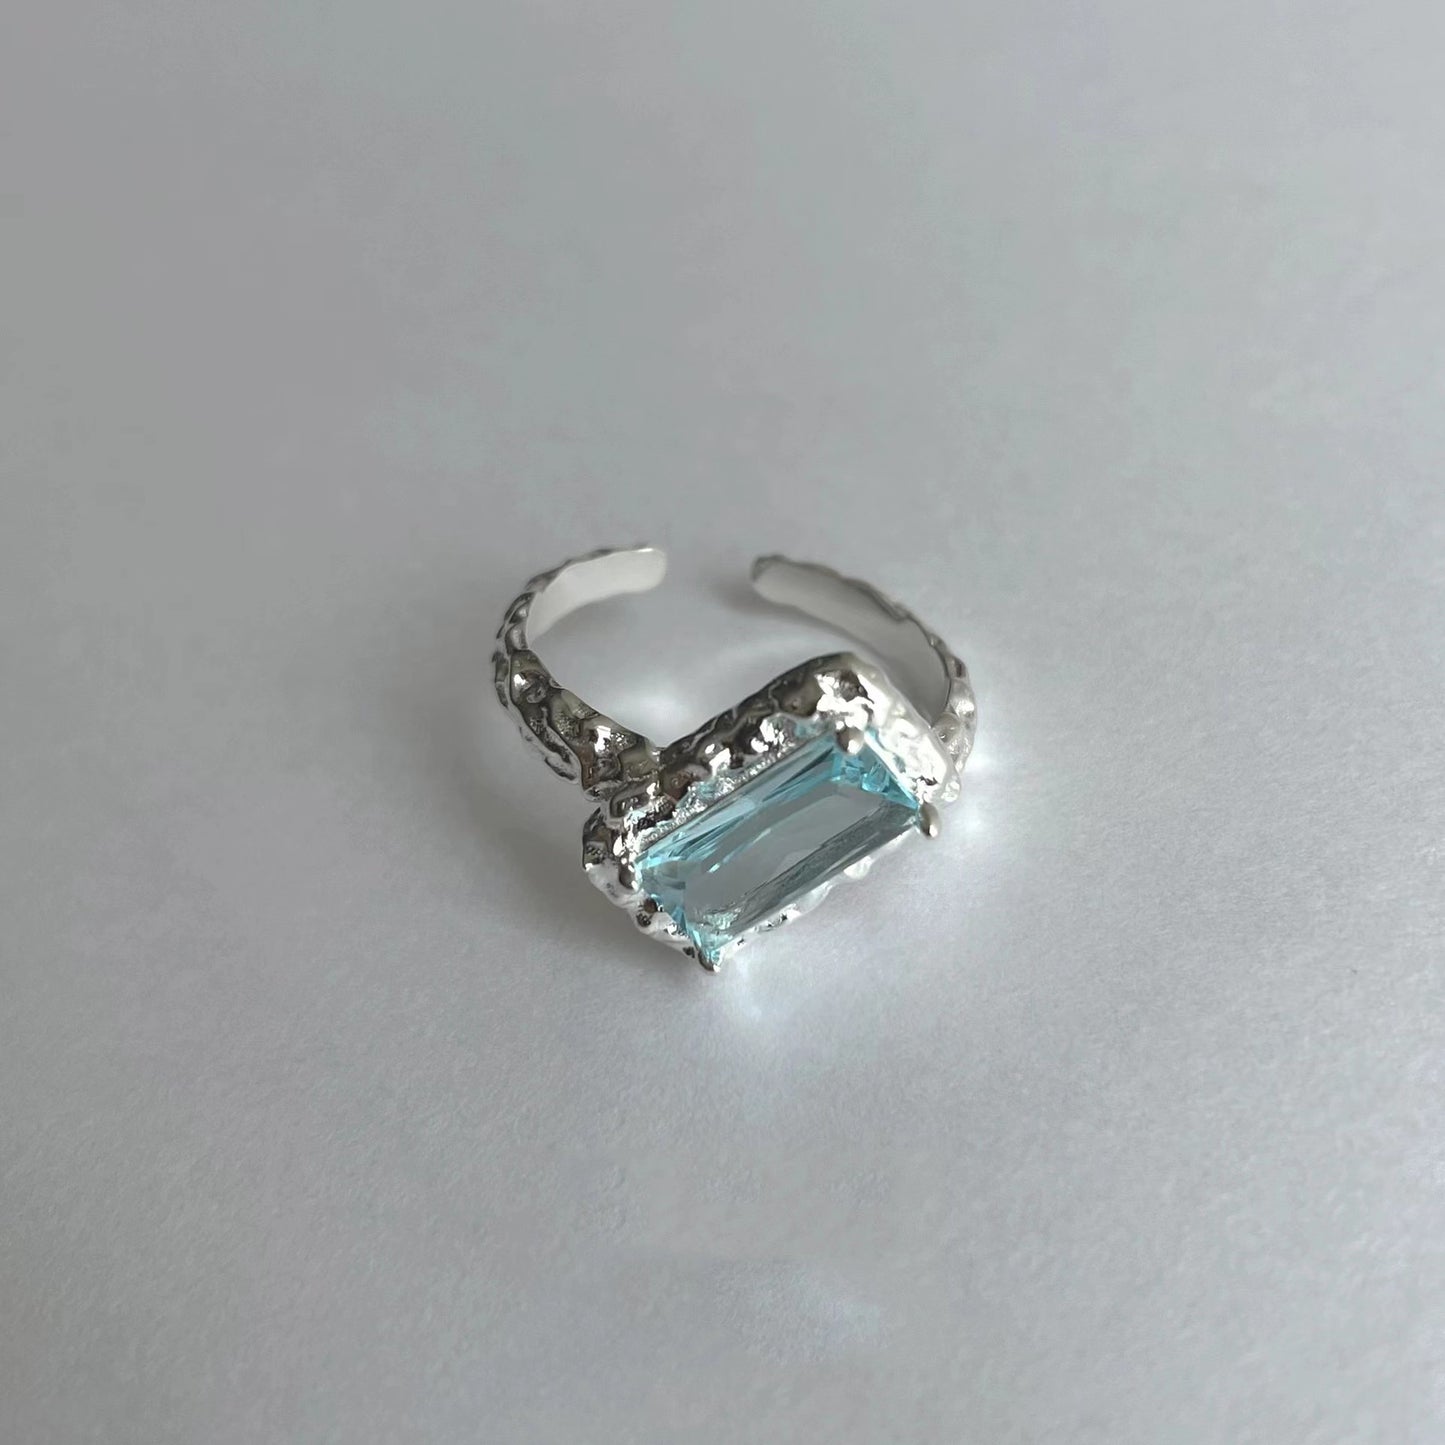 Blue zirconia high class cool style ring